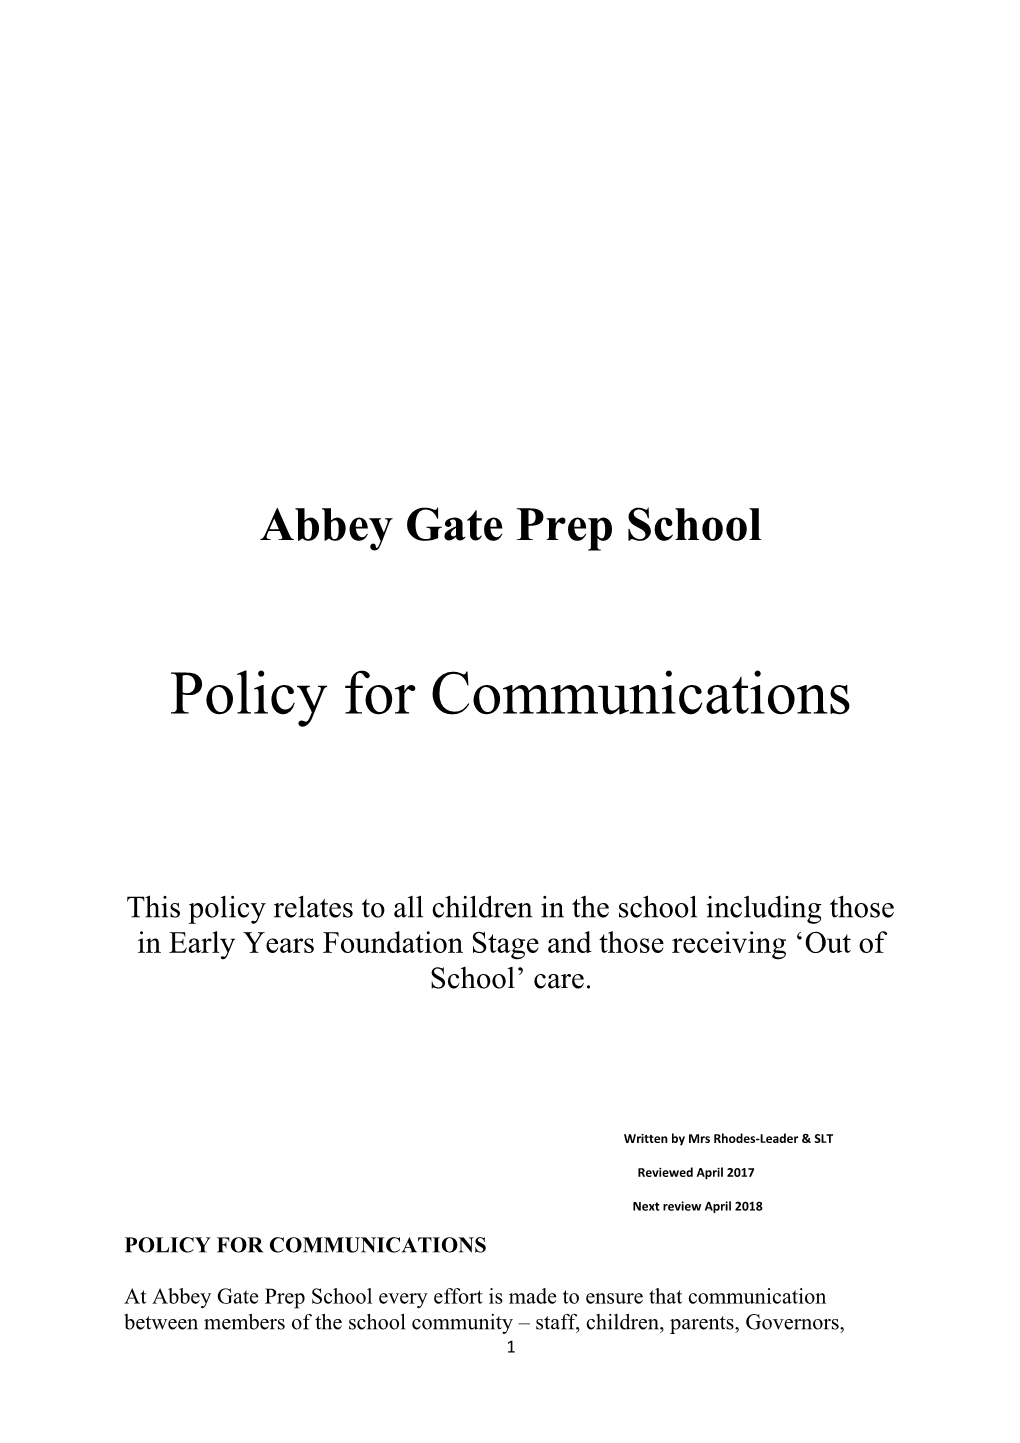 Abbey Gate Prep School Policy for Communications